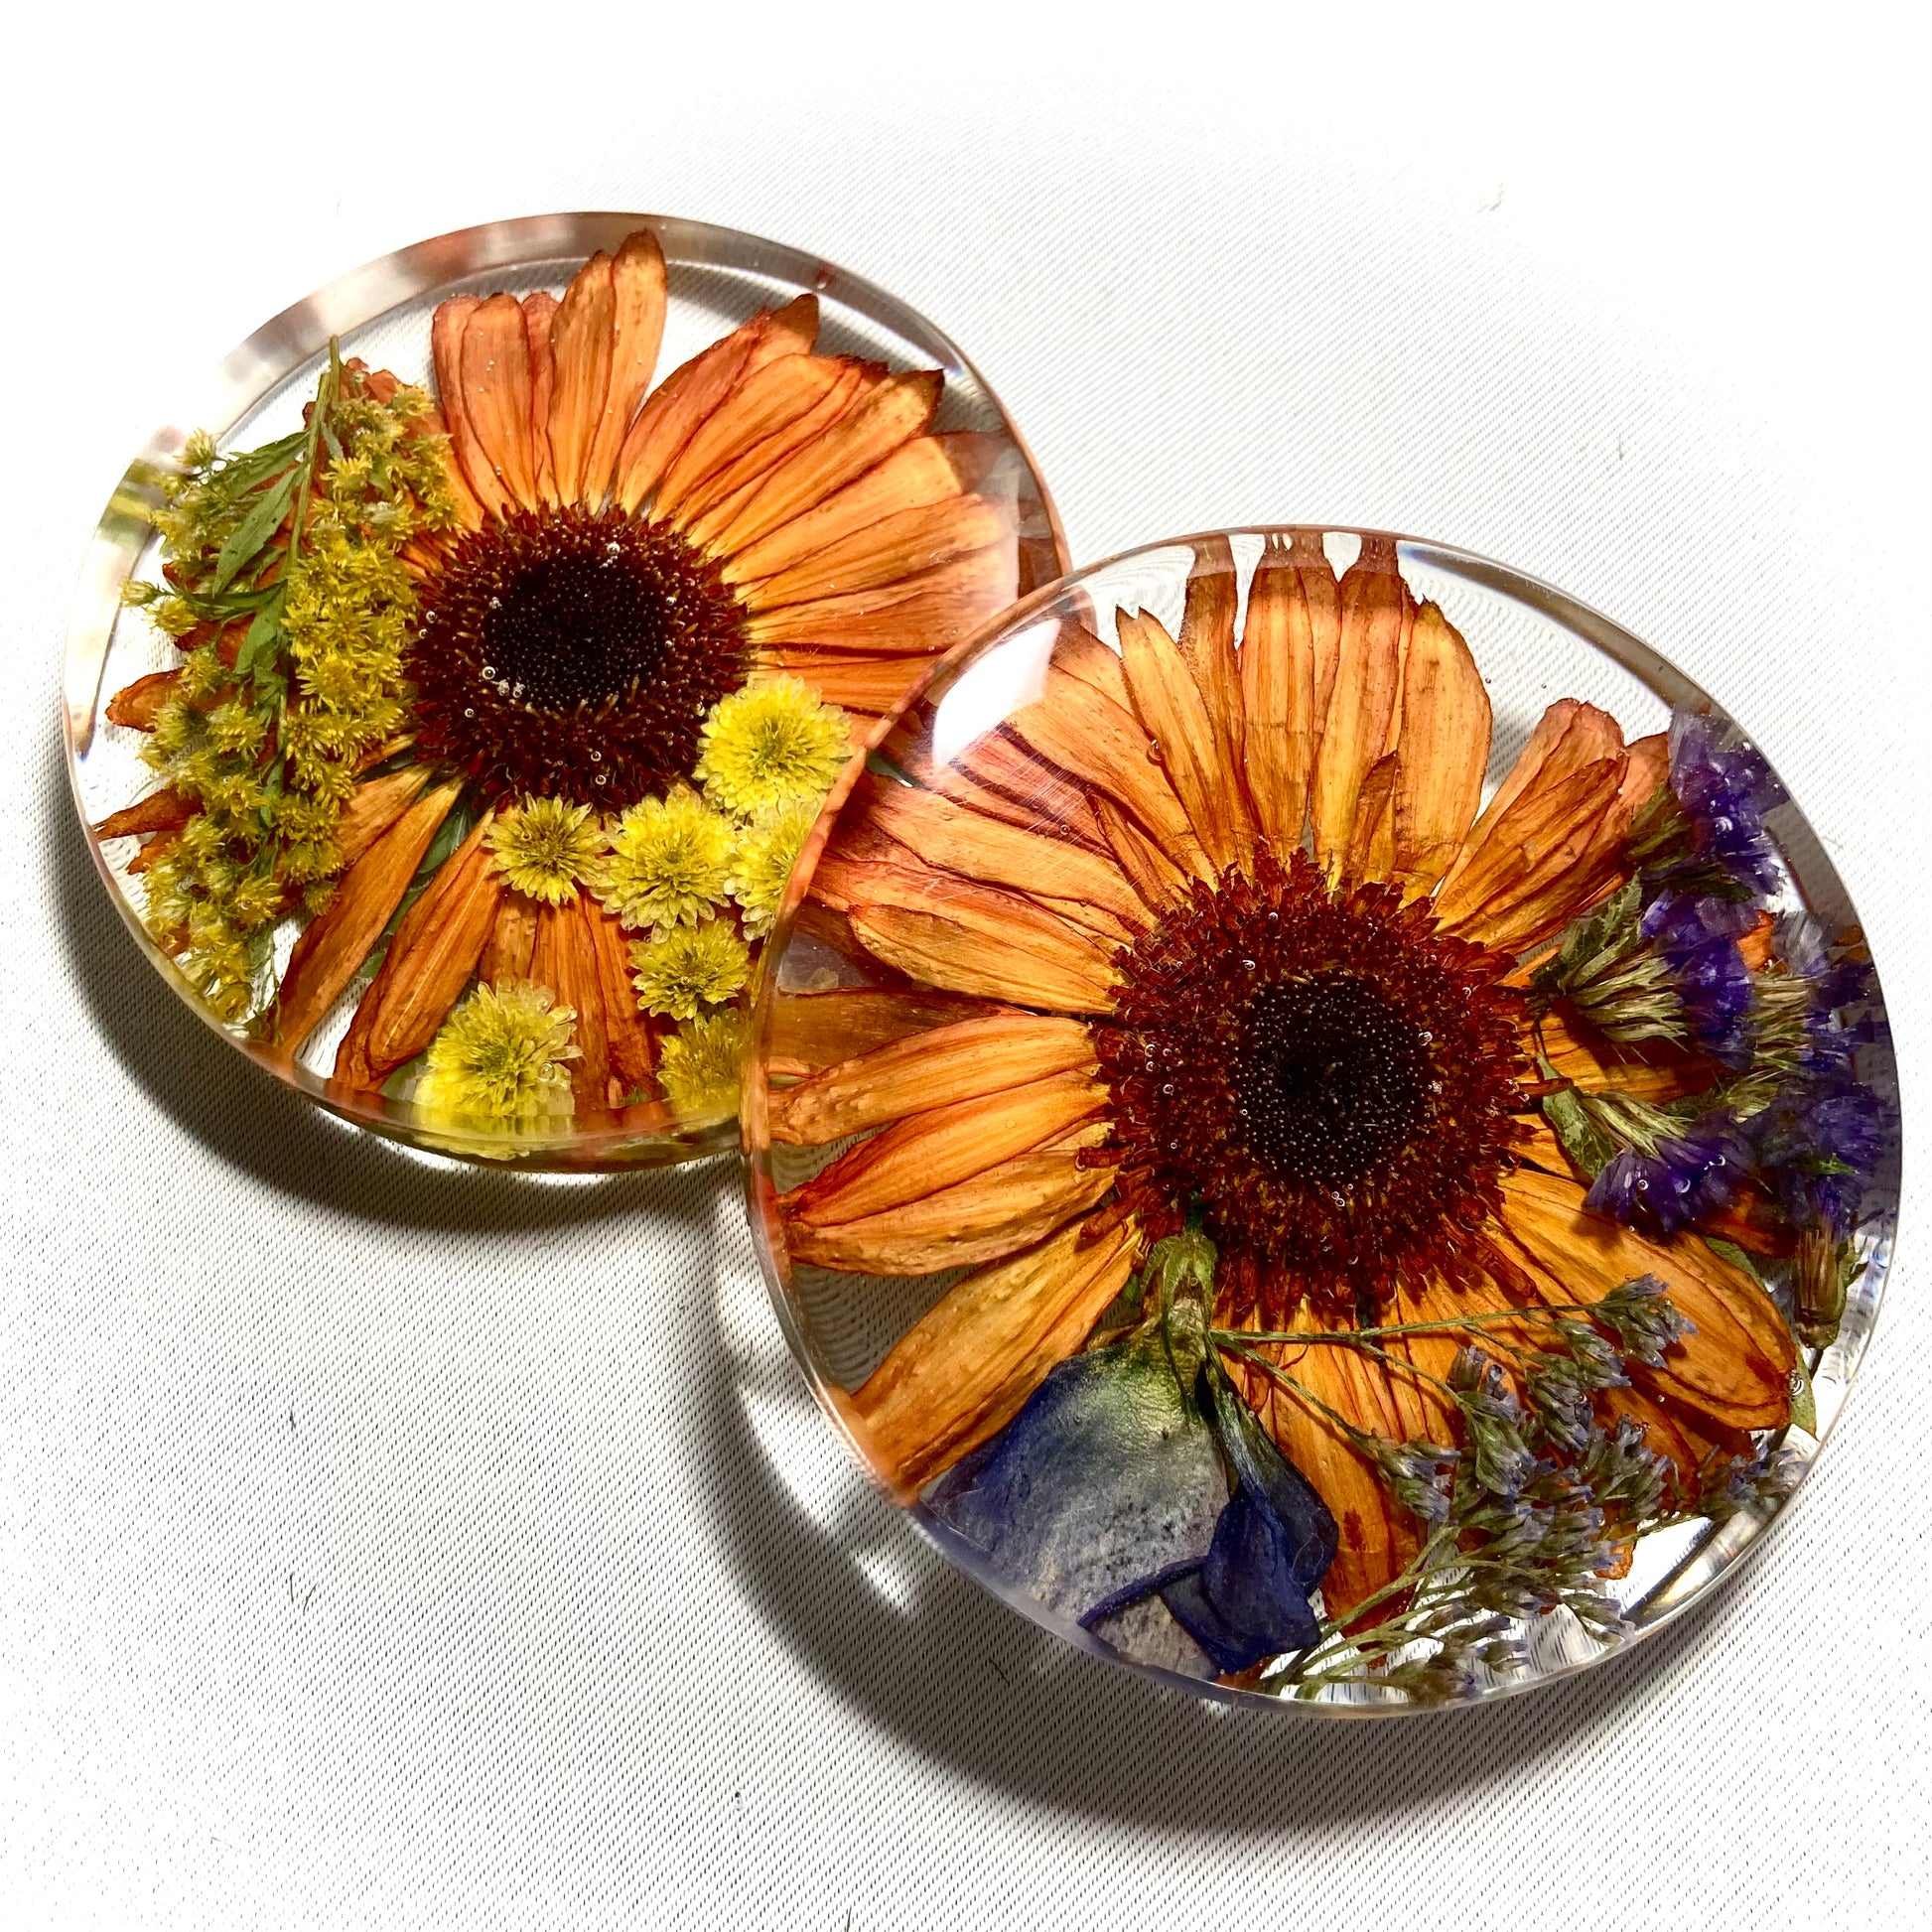 A clear, resin coaster featuring preserved wedding flowers encased within its surface. The round coaster showcases a bouquet of delicate blooms in vibrant colors, adding a touch of elegance to any tabletop.